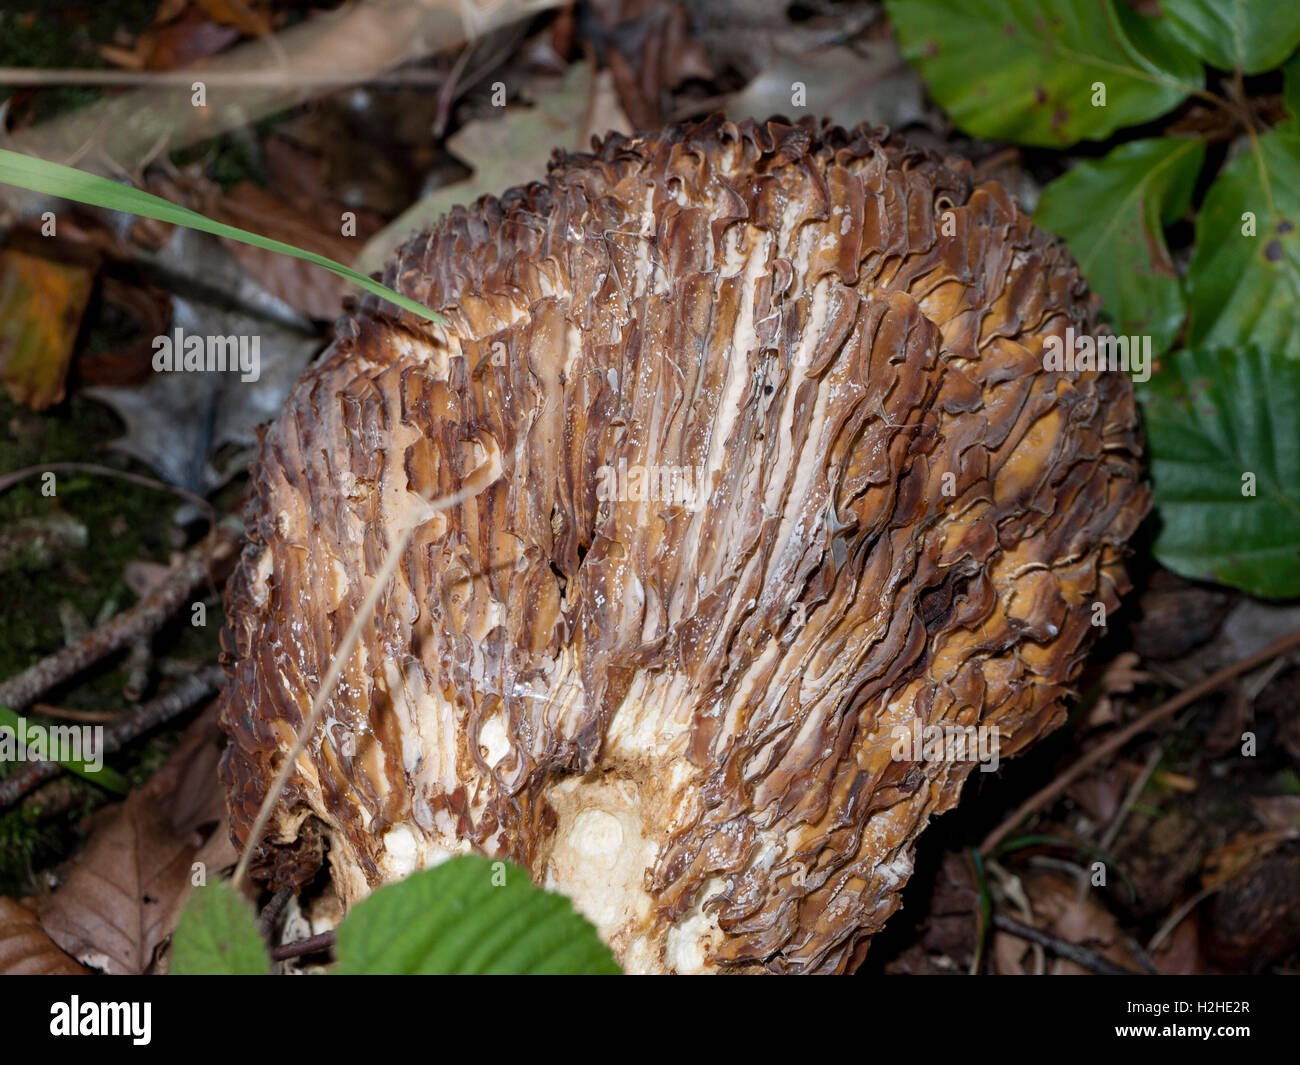 Remains of a large gilled mushroom type unknown, England UK. Stock Photo